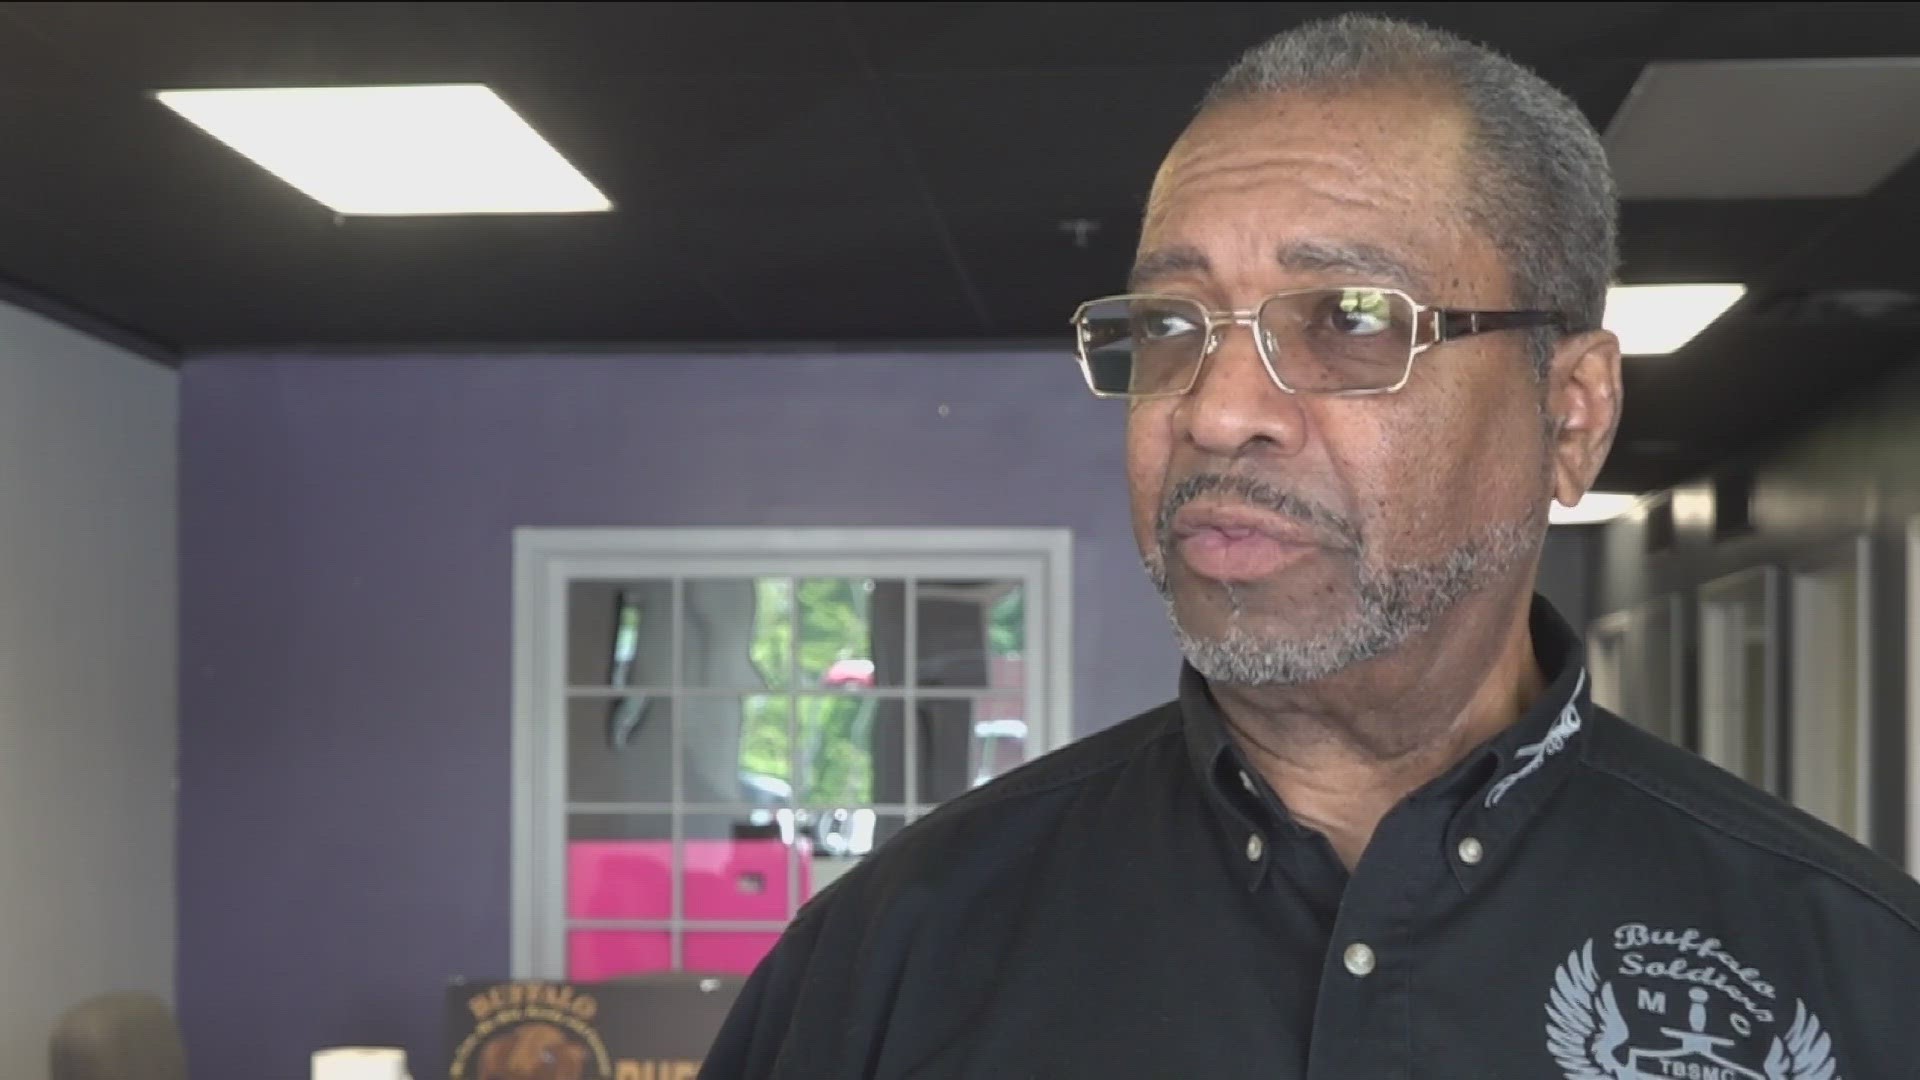 Earl Mack, a former police officer and Buffalo Soldier, responded to the criticism of the discipline for officers involved in controversial traffic stop.